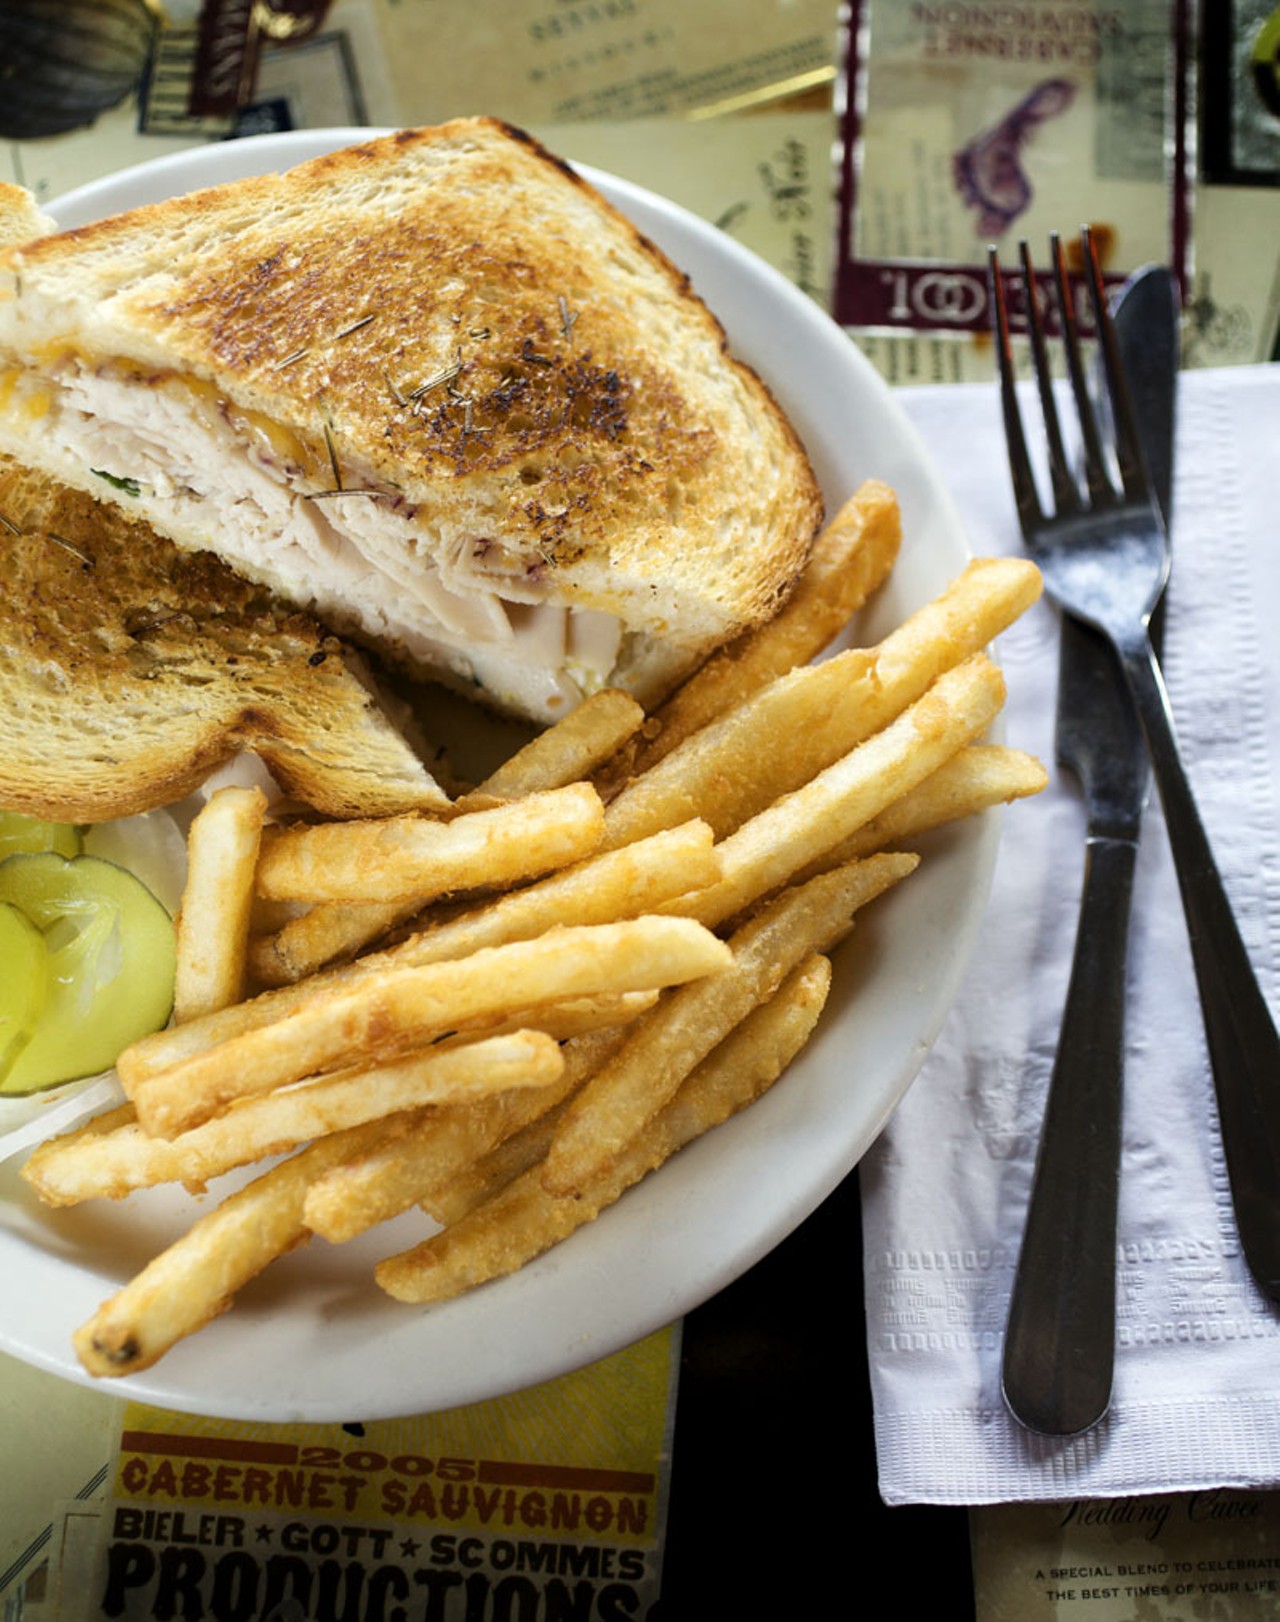 The Herb Roasted Turkey sandwich is served on sourdough bread with artichoke garlic spread, Swiss and Colby Jack cheeses. All the sandwiches come with fries.